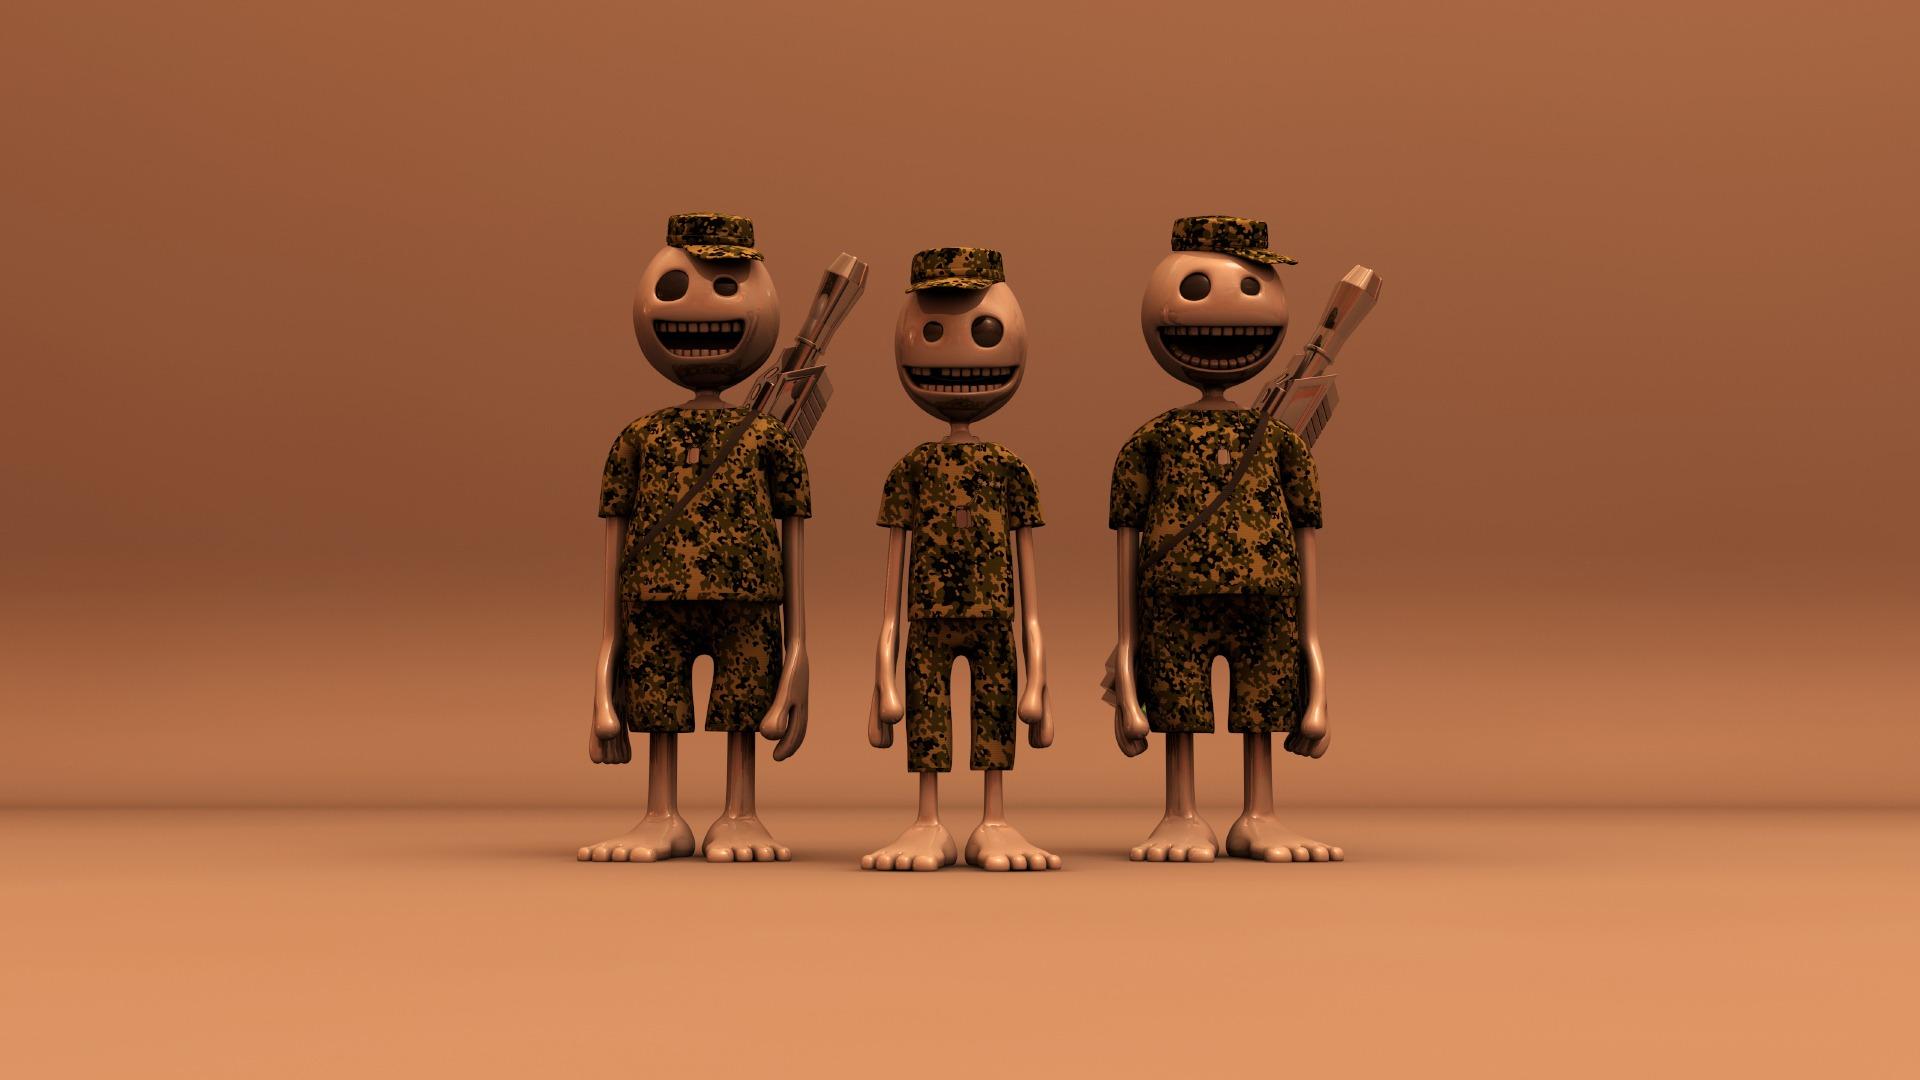 Army Group Wallpaper 3D Characters 3D Wallpaper in jpg format